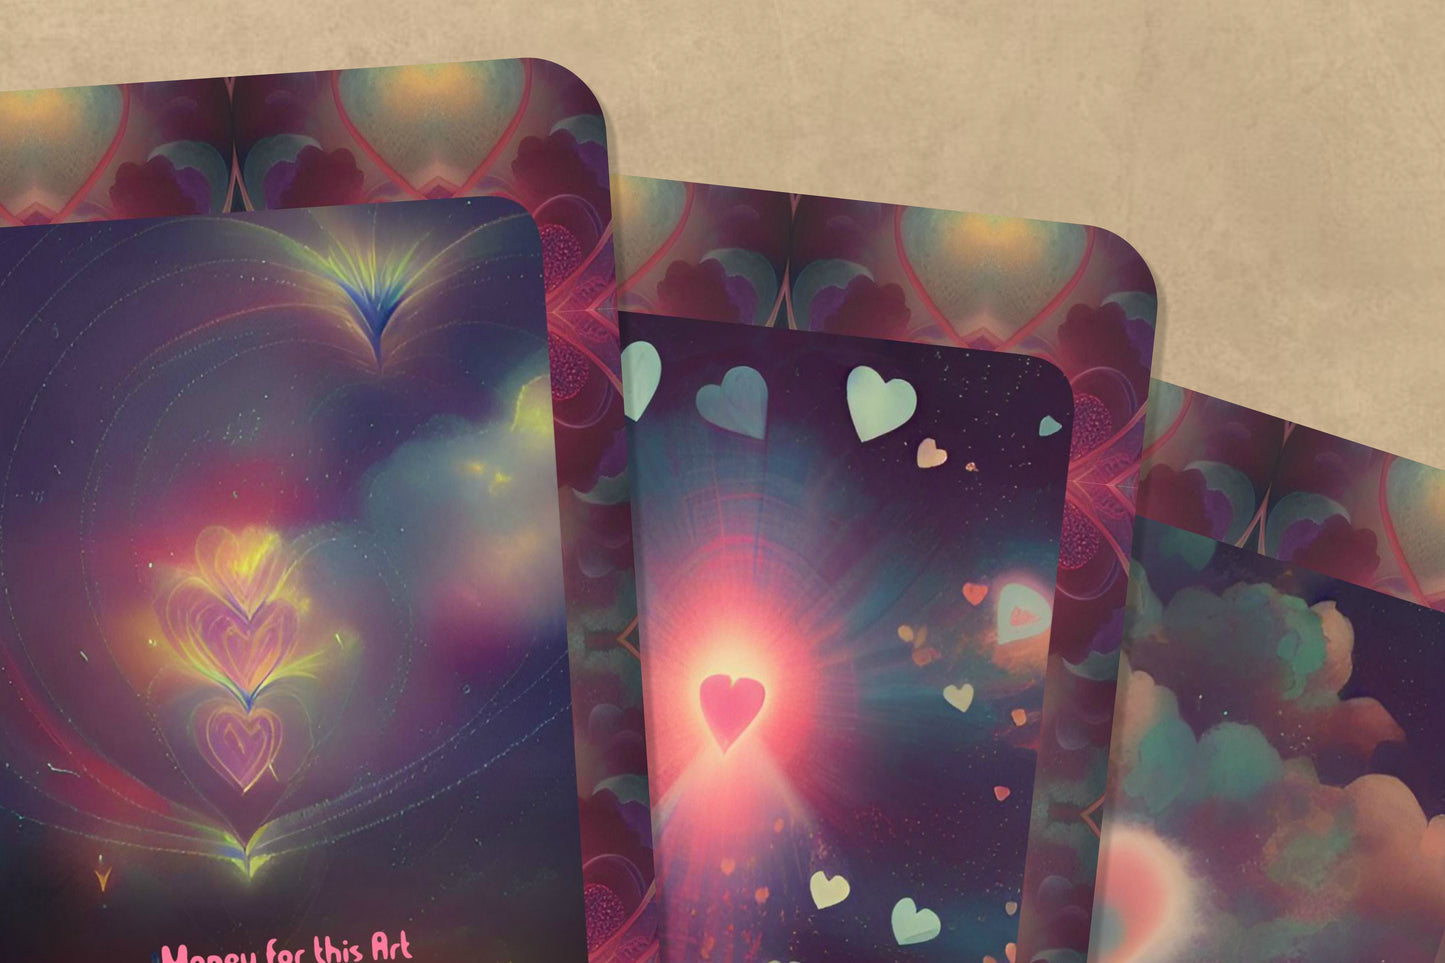 The Shape of my Heart - Oracle Cards